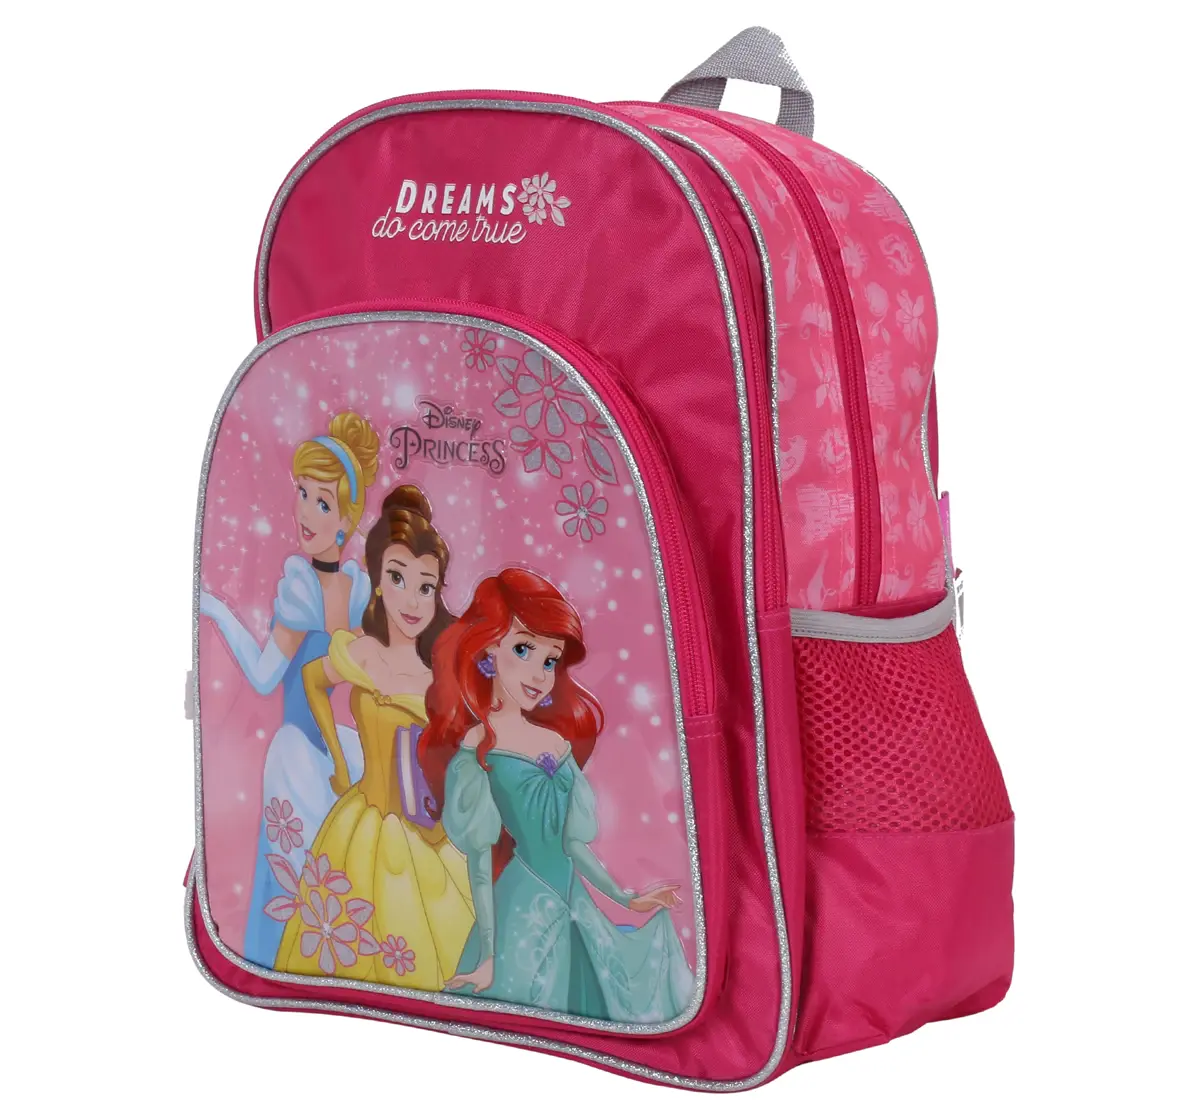 Simba Princess Find Your Fate 14 Backpack Multicolor 3Y+